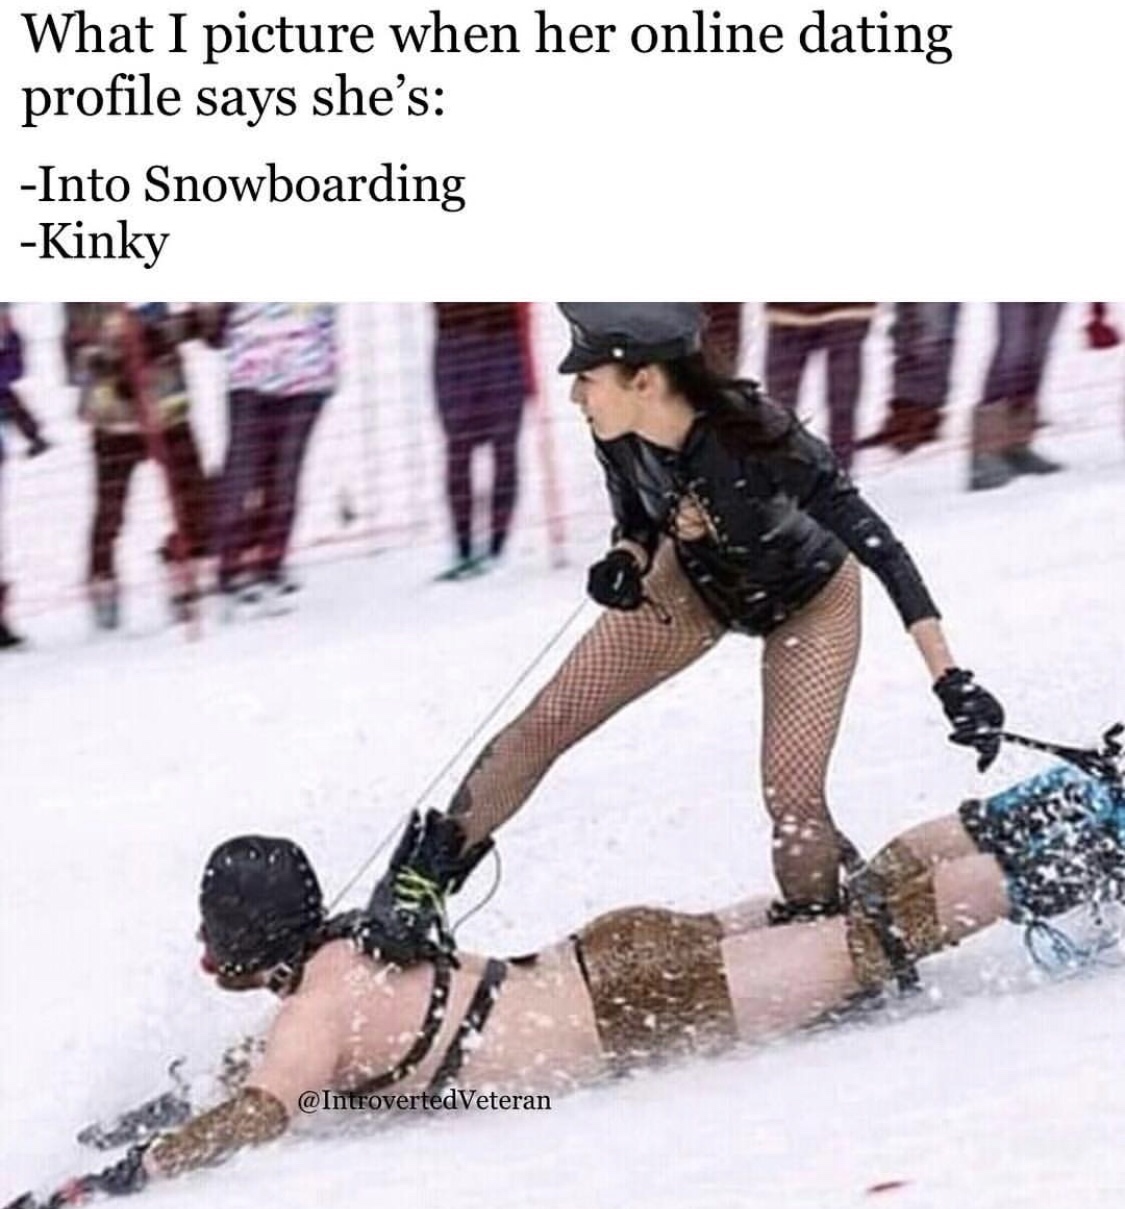 usa democracy meme - What I picture when her online dating profile says she's Into Snowboarding Kinky